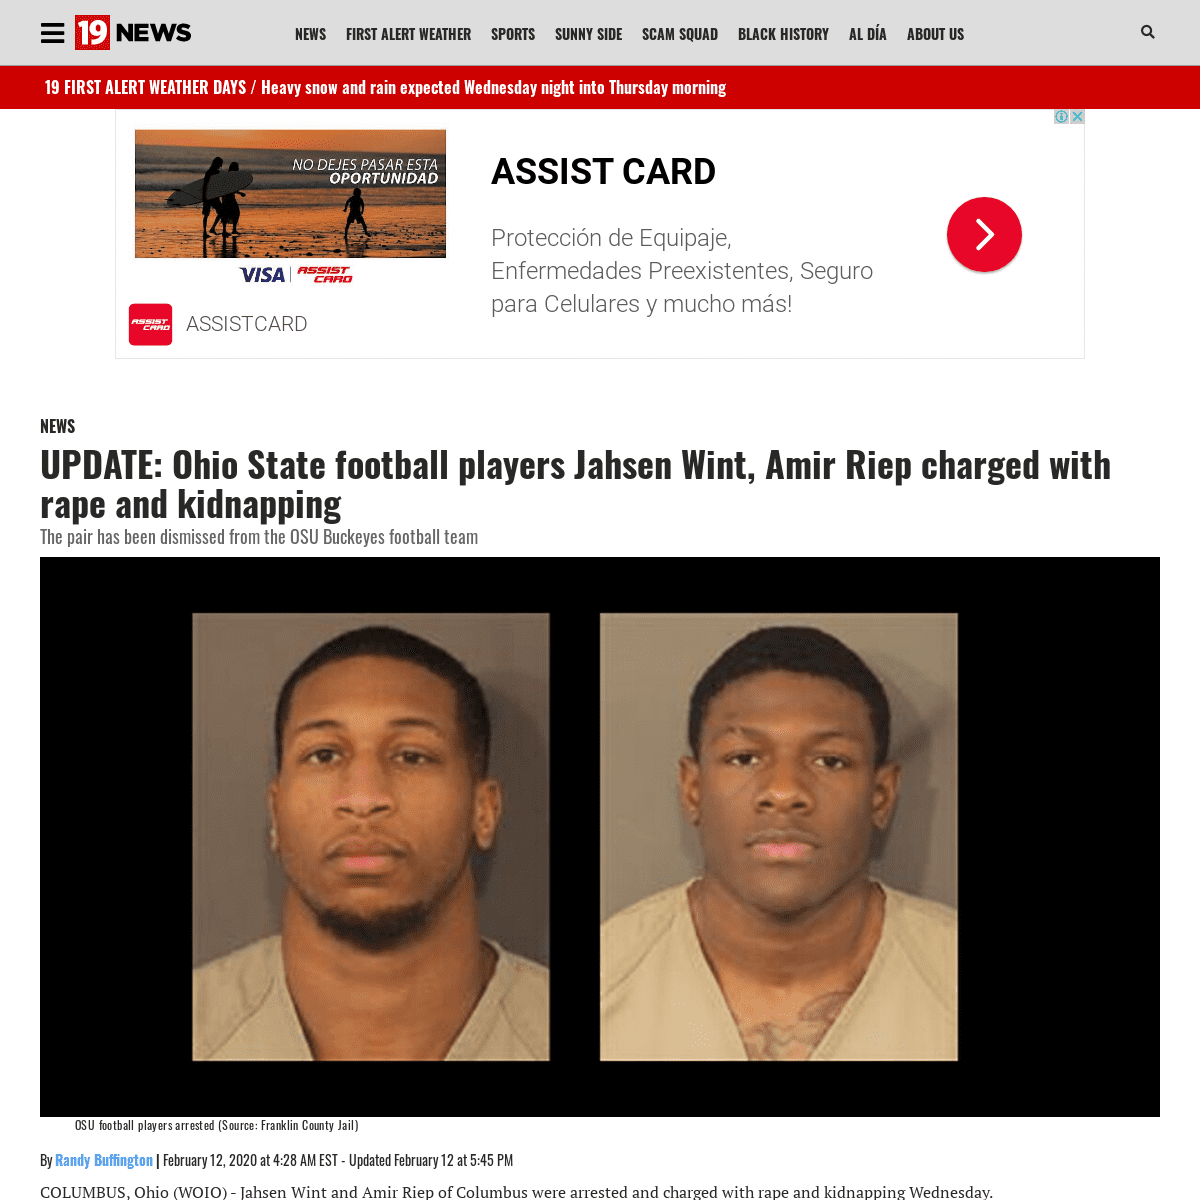 A complete backup of www.cleveland19.com/2020/02/12/ohio-state-football-players-jahsen-wint-amir-riep-charged-with-rape-kidnappi